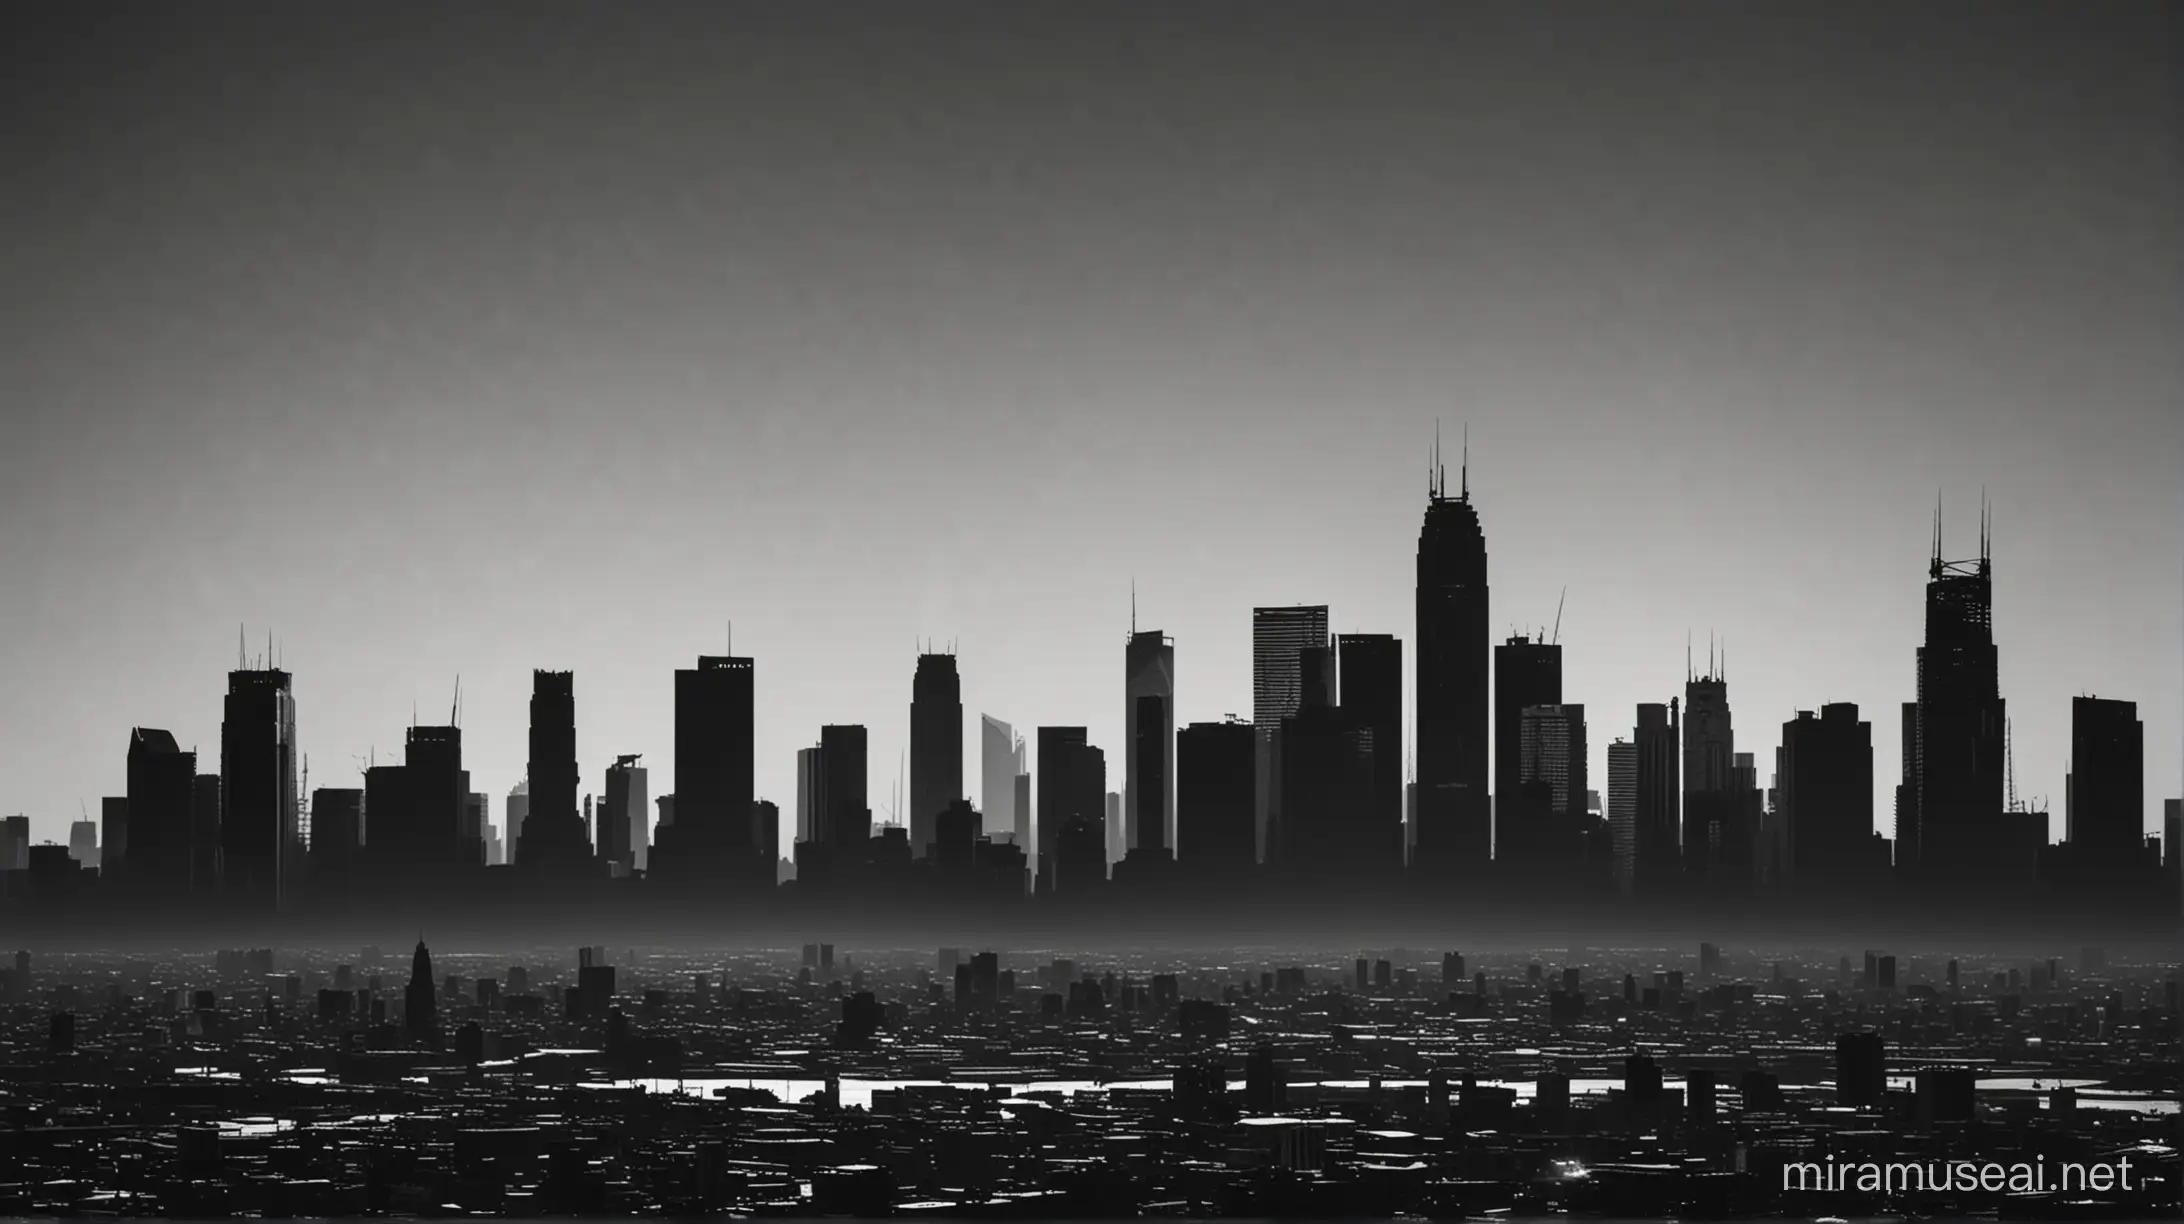 varied modern city skyline 
photo with plenty of negative space in the style of a roger deakins film